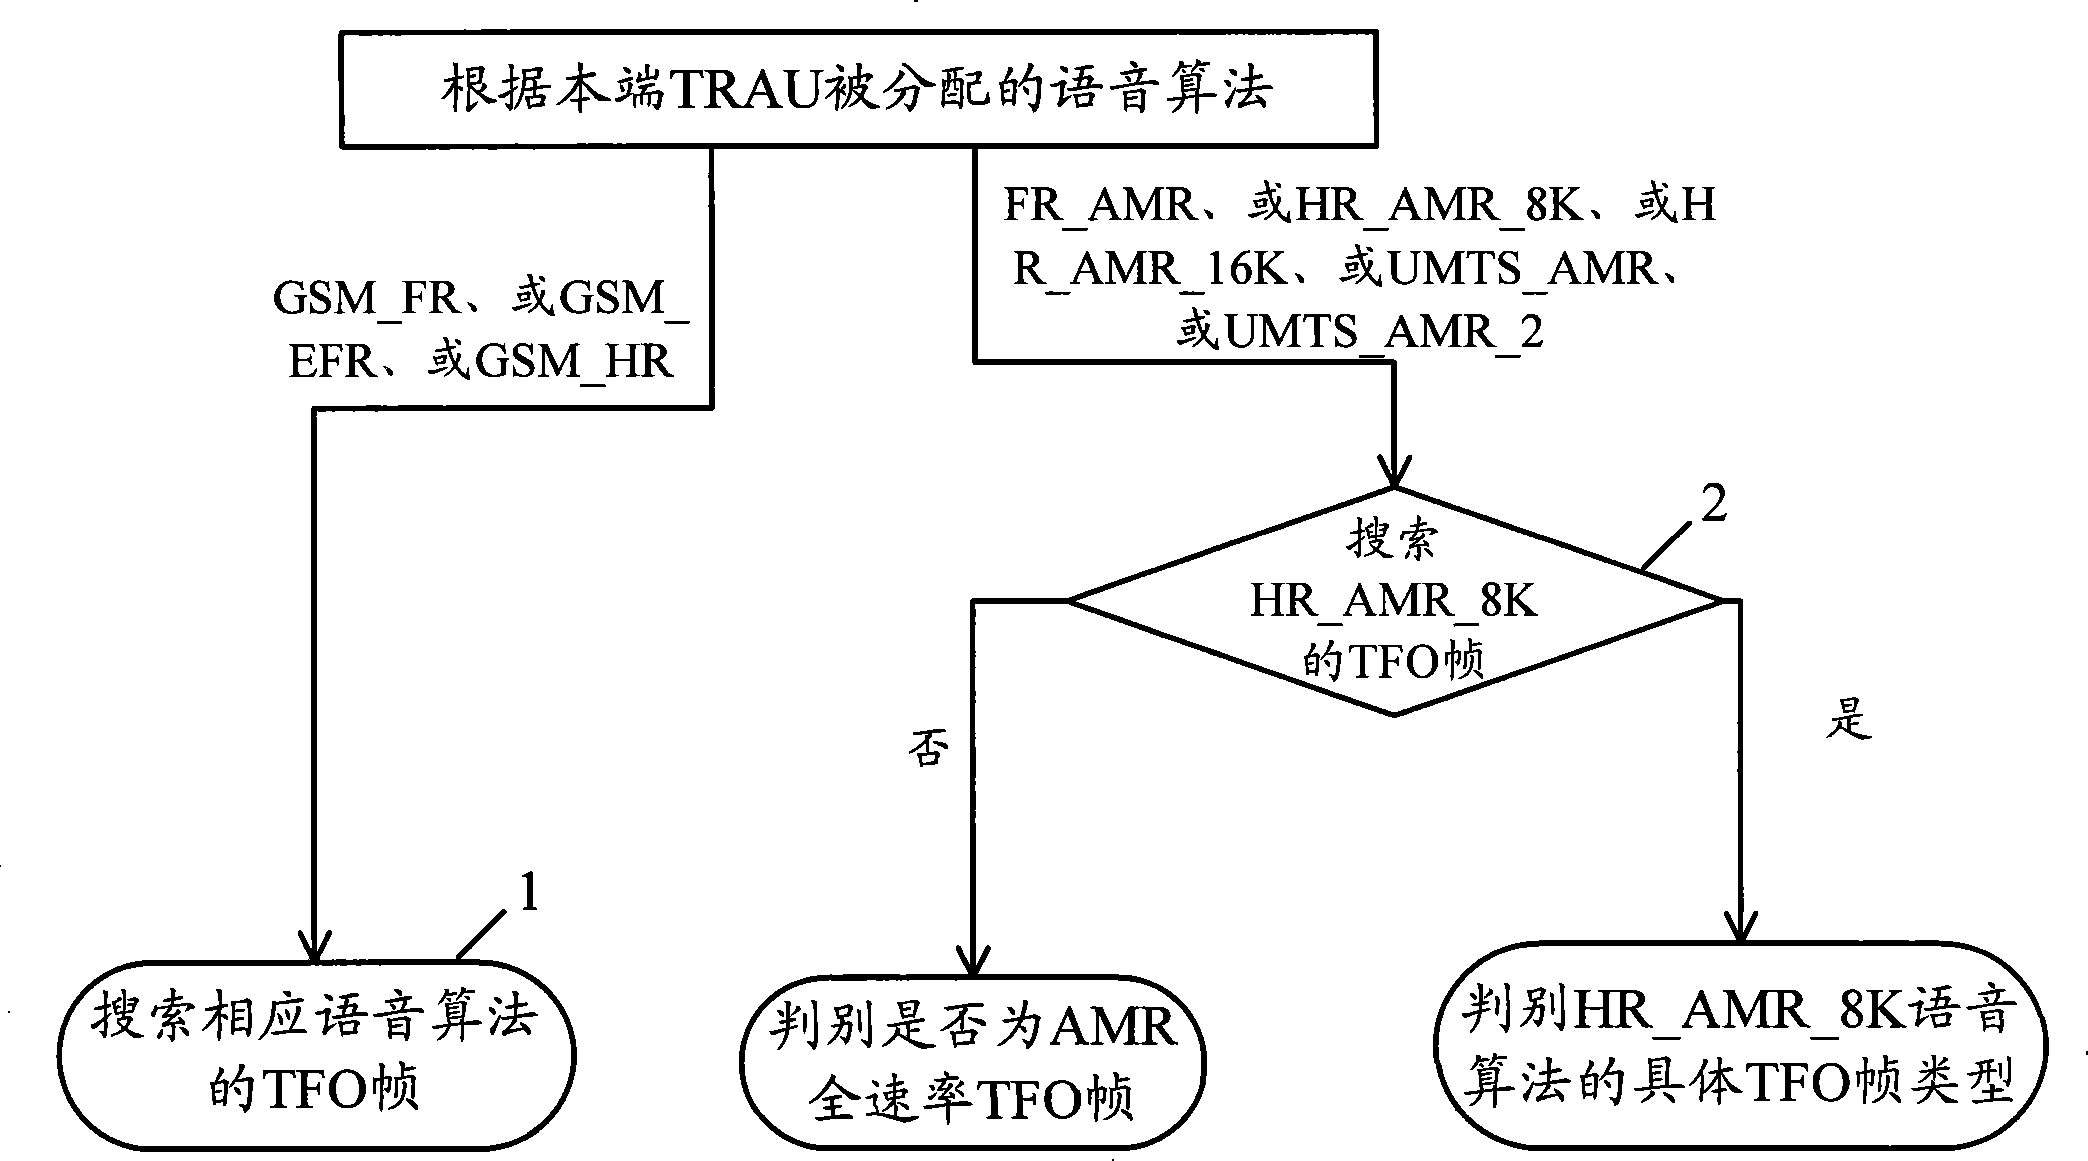 Down synchronous monitoring method without secondary encoding/decoding operation